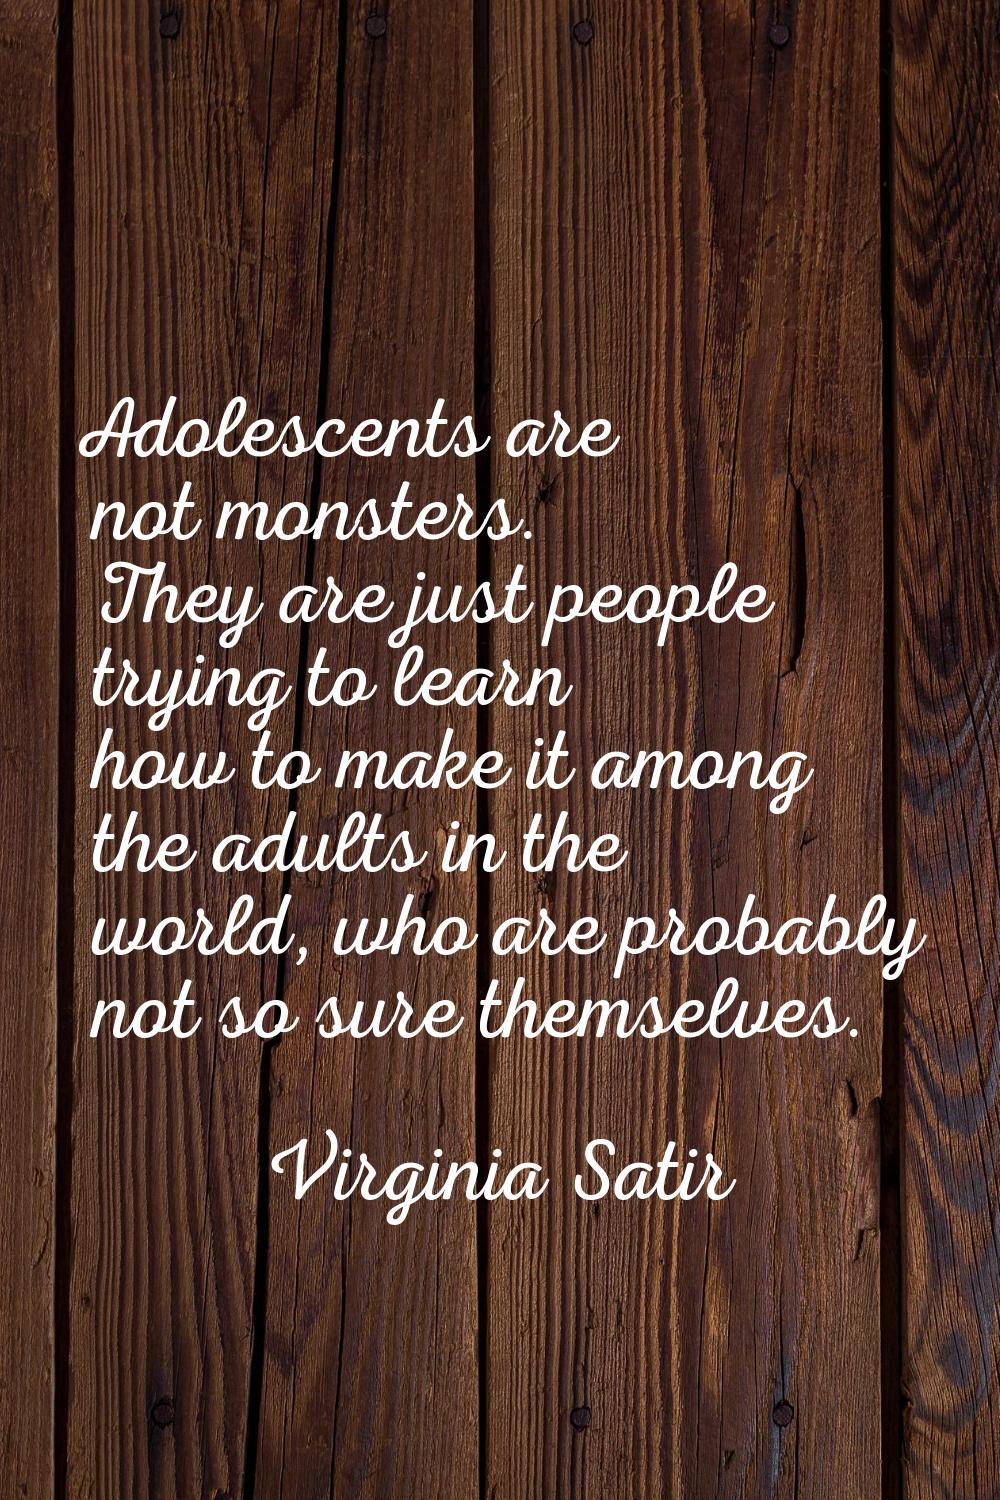 Adolescents are not monsters. They are just people trying to learn how to make it among the adults 